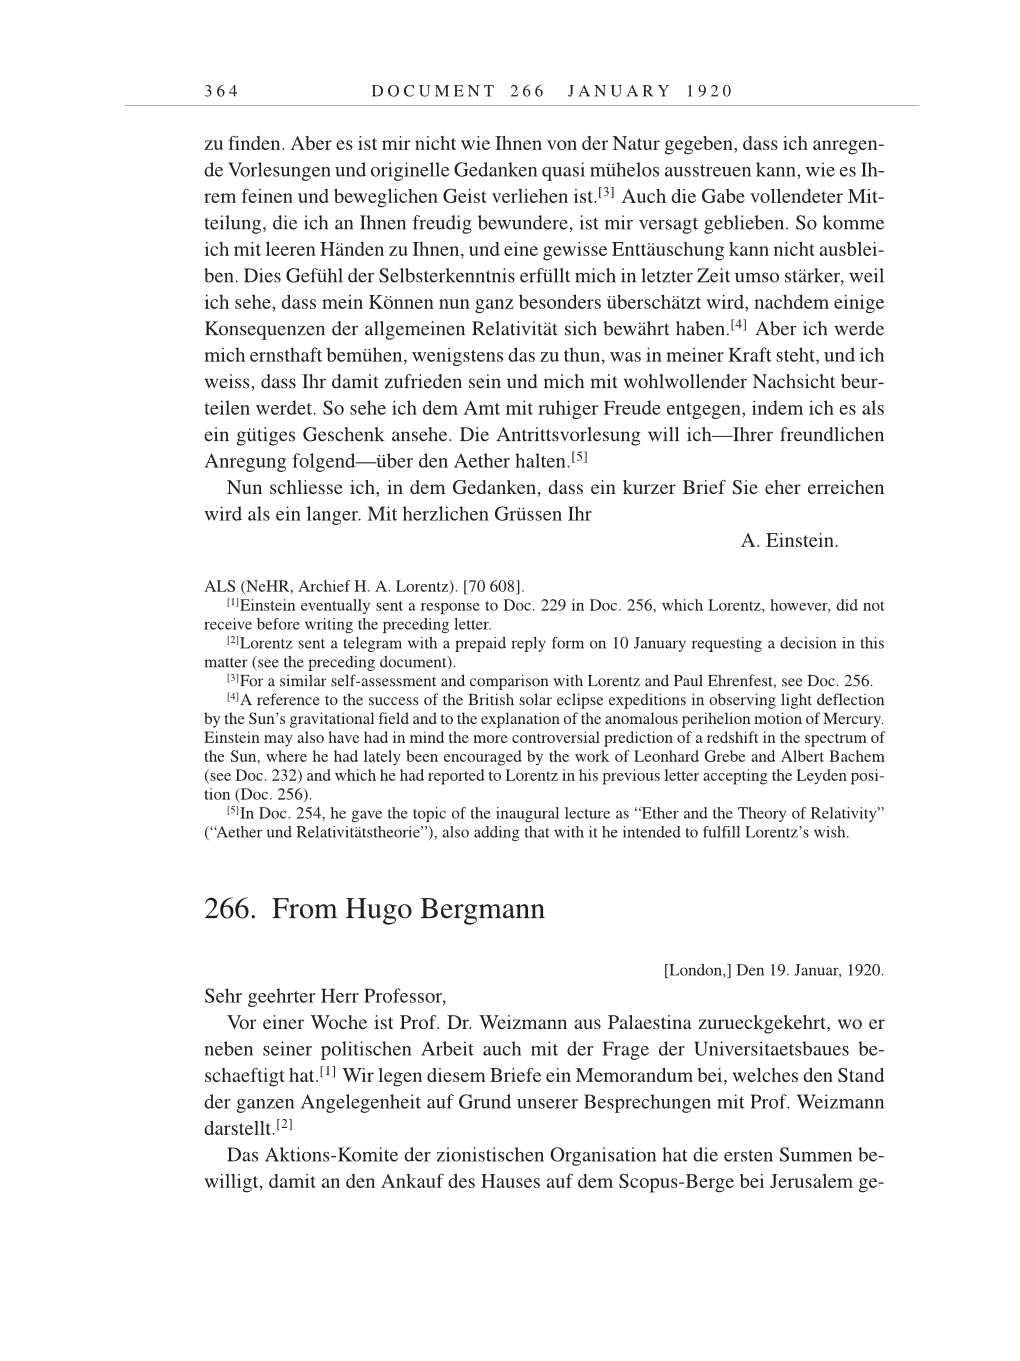 Volume 9: The Berlin Years: Correspondence January 1919-April 1920 page 364